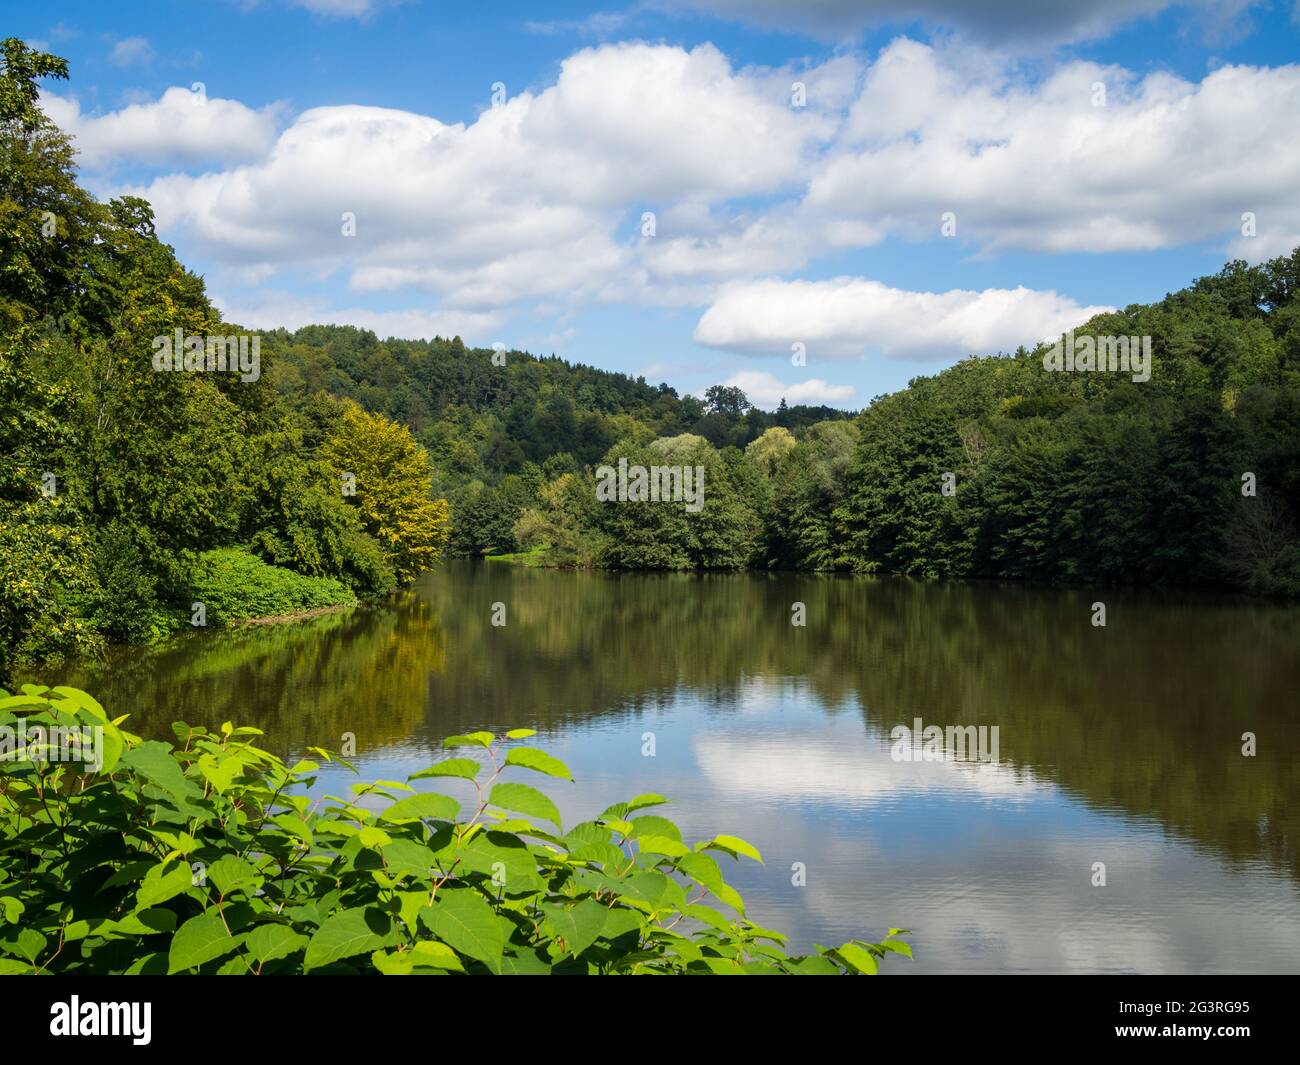 Nice lake with surrounding forest and plants Stock Photo